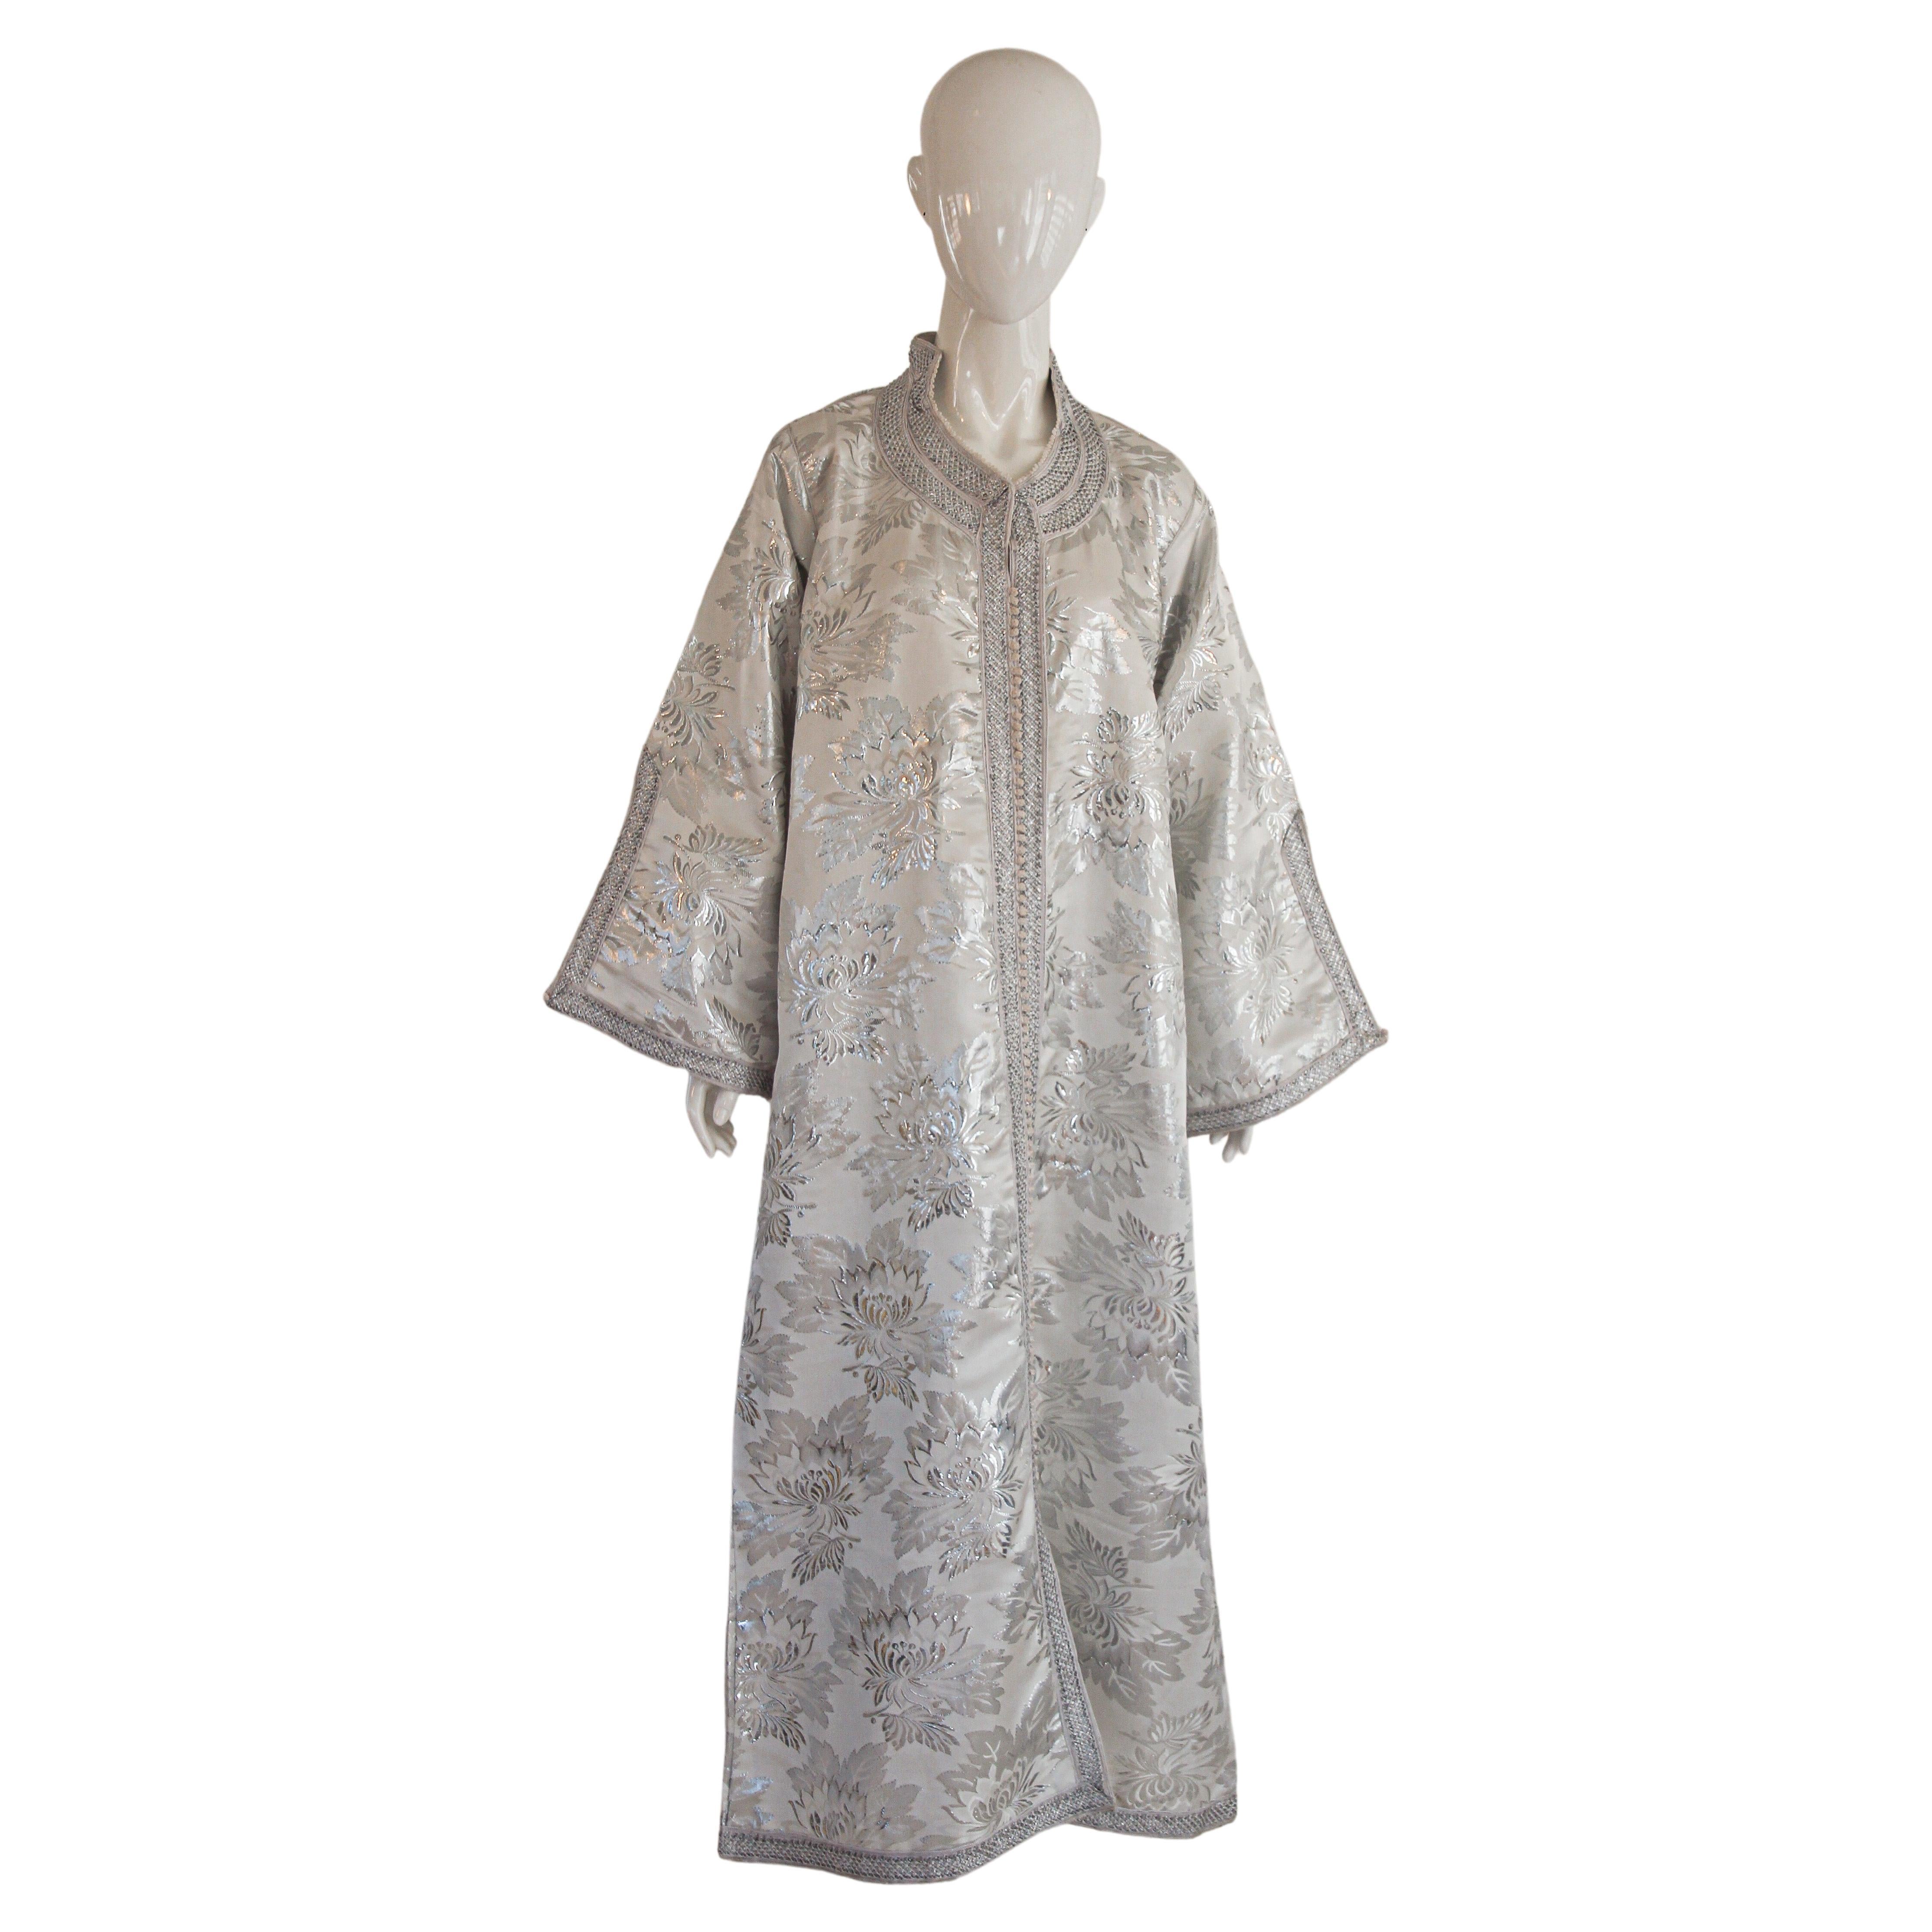 Amazing vintage Moroccan Caftan, silver silk damask with silver threads trim, Circa 1960's
The light silver damask kaftan was entirely finish by hand.
One of a kind evening antique Moorish gown.
This authentic caftan has been hand-sewn from high end